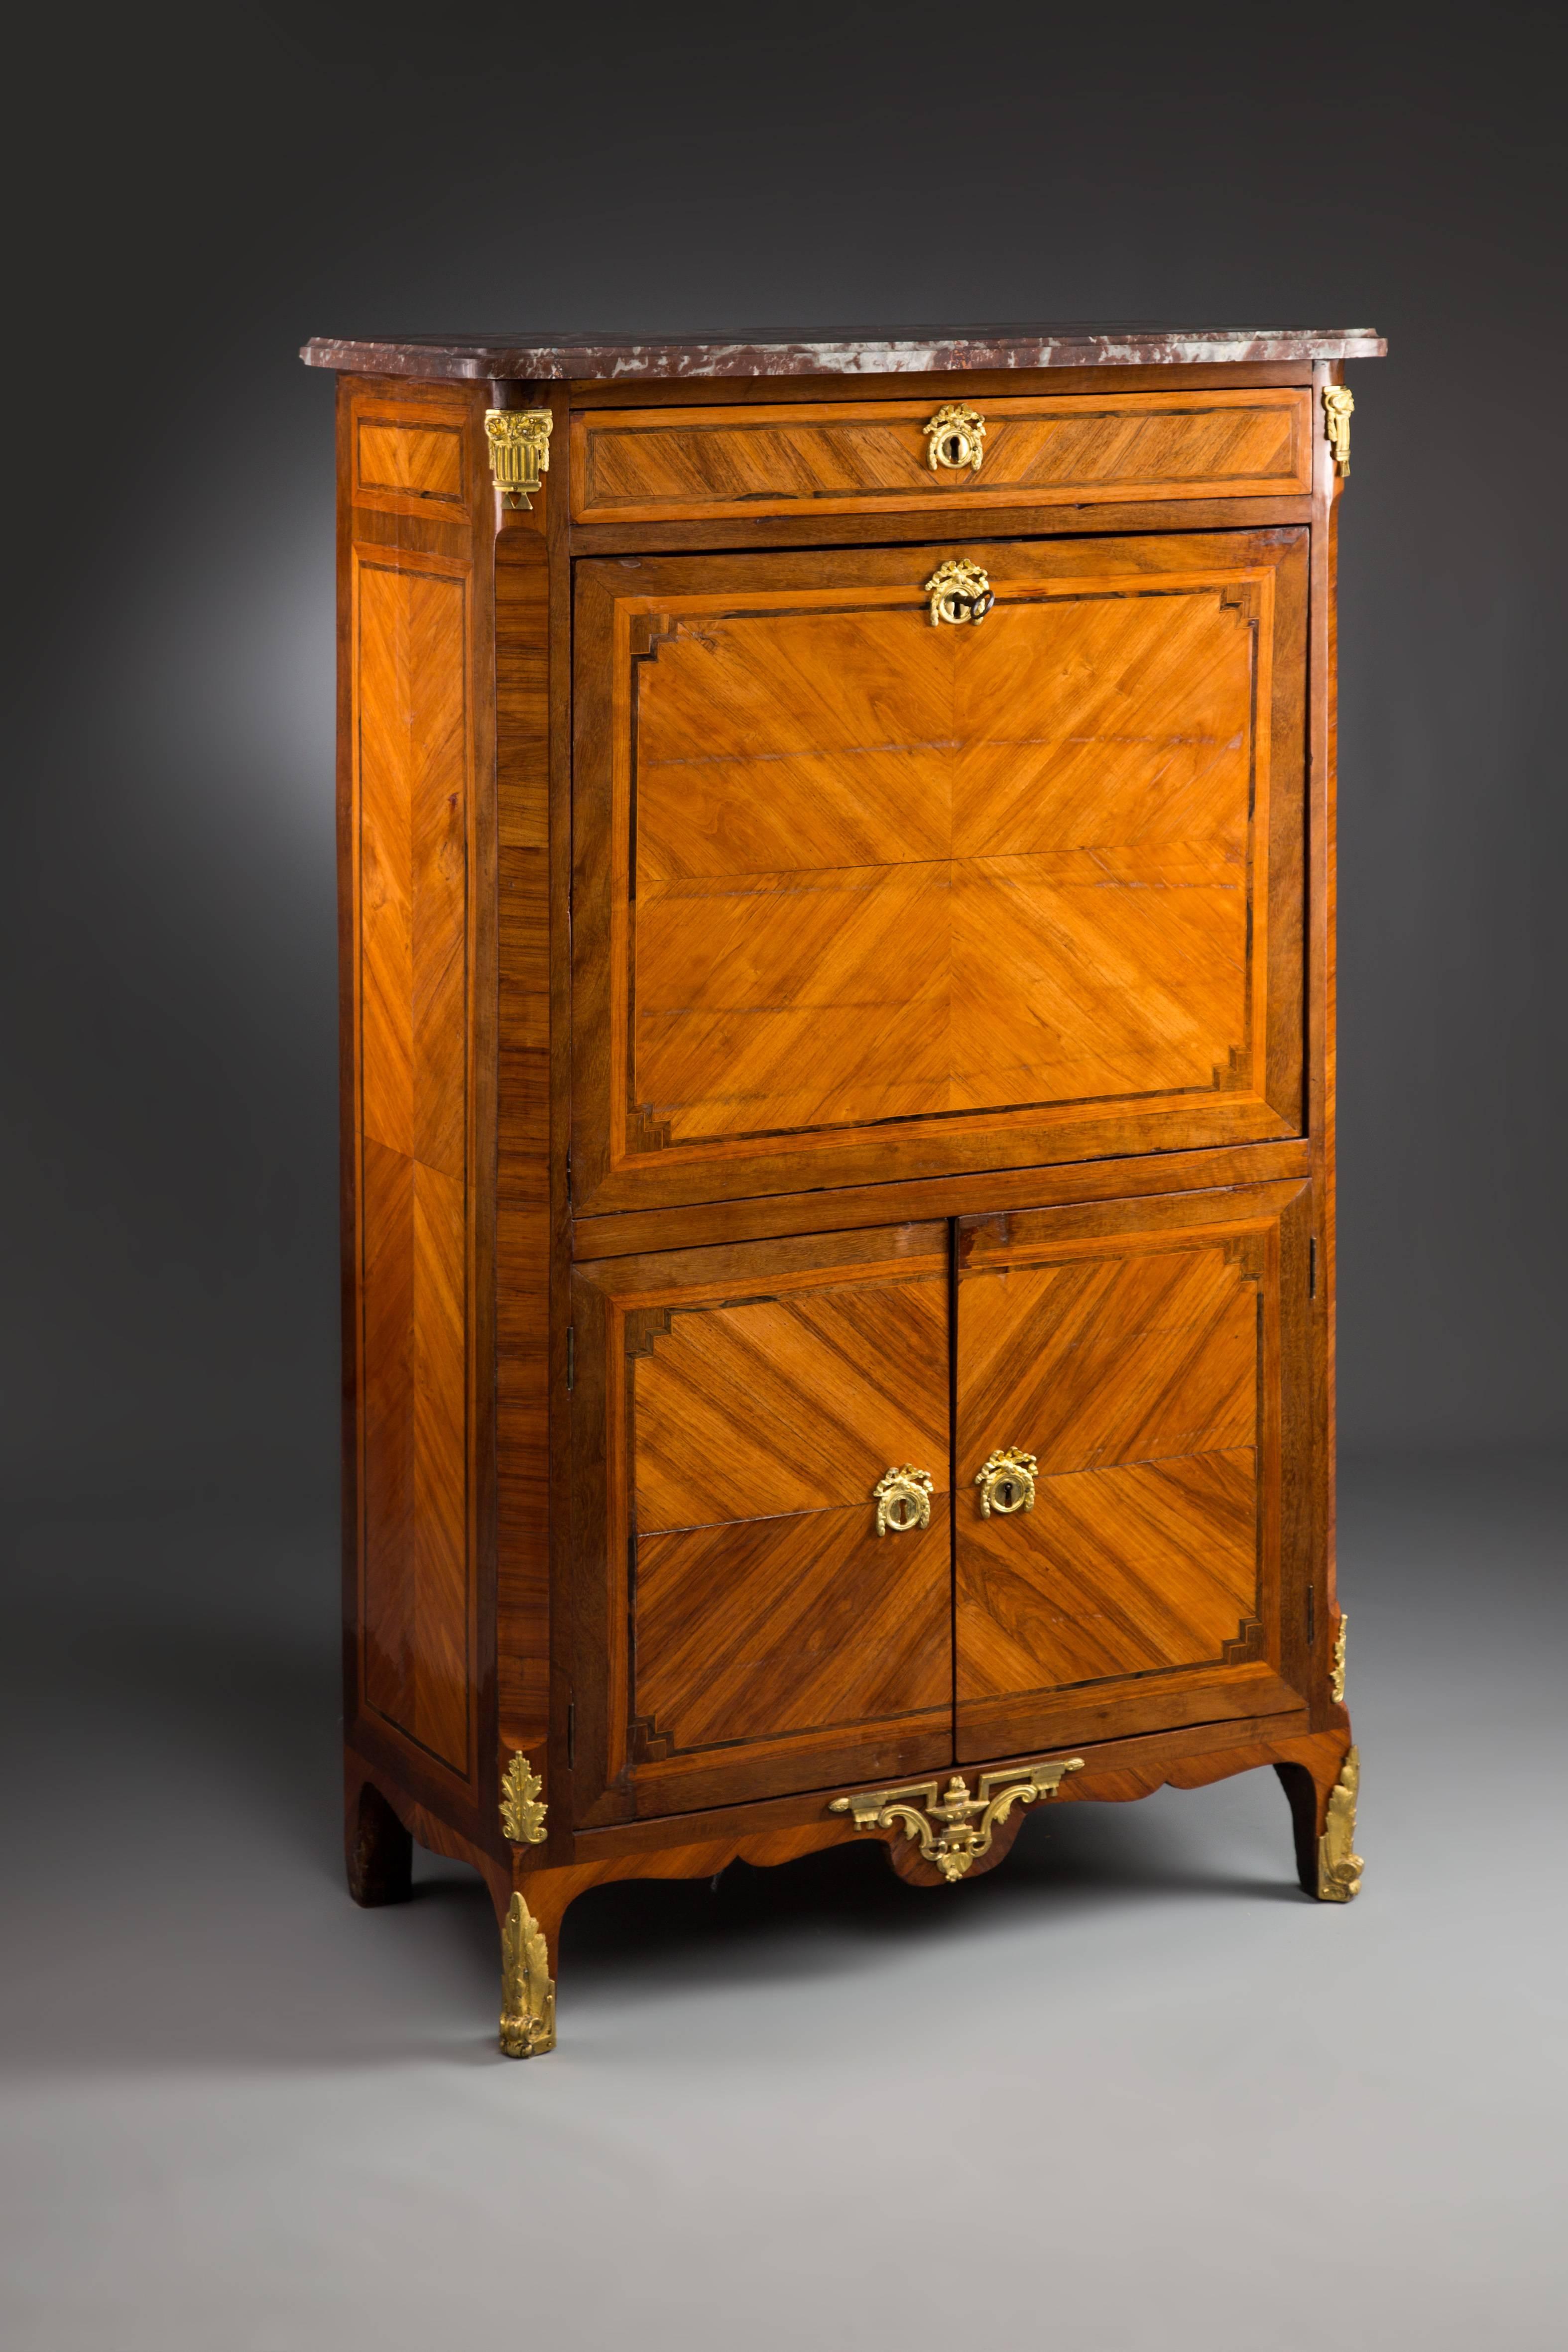 Rose veneer on oak. High-rectangular body with finely veneered wood on four feet. Foldable writing board (leather cover missing), a drawer, lower wing door. Gilded bronze mountings. Top cover with a gray brown marble top. Signed.


(L-128).